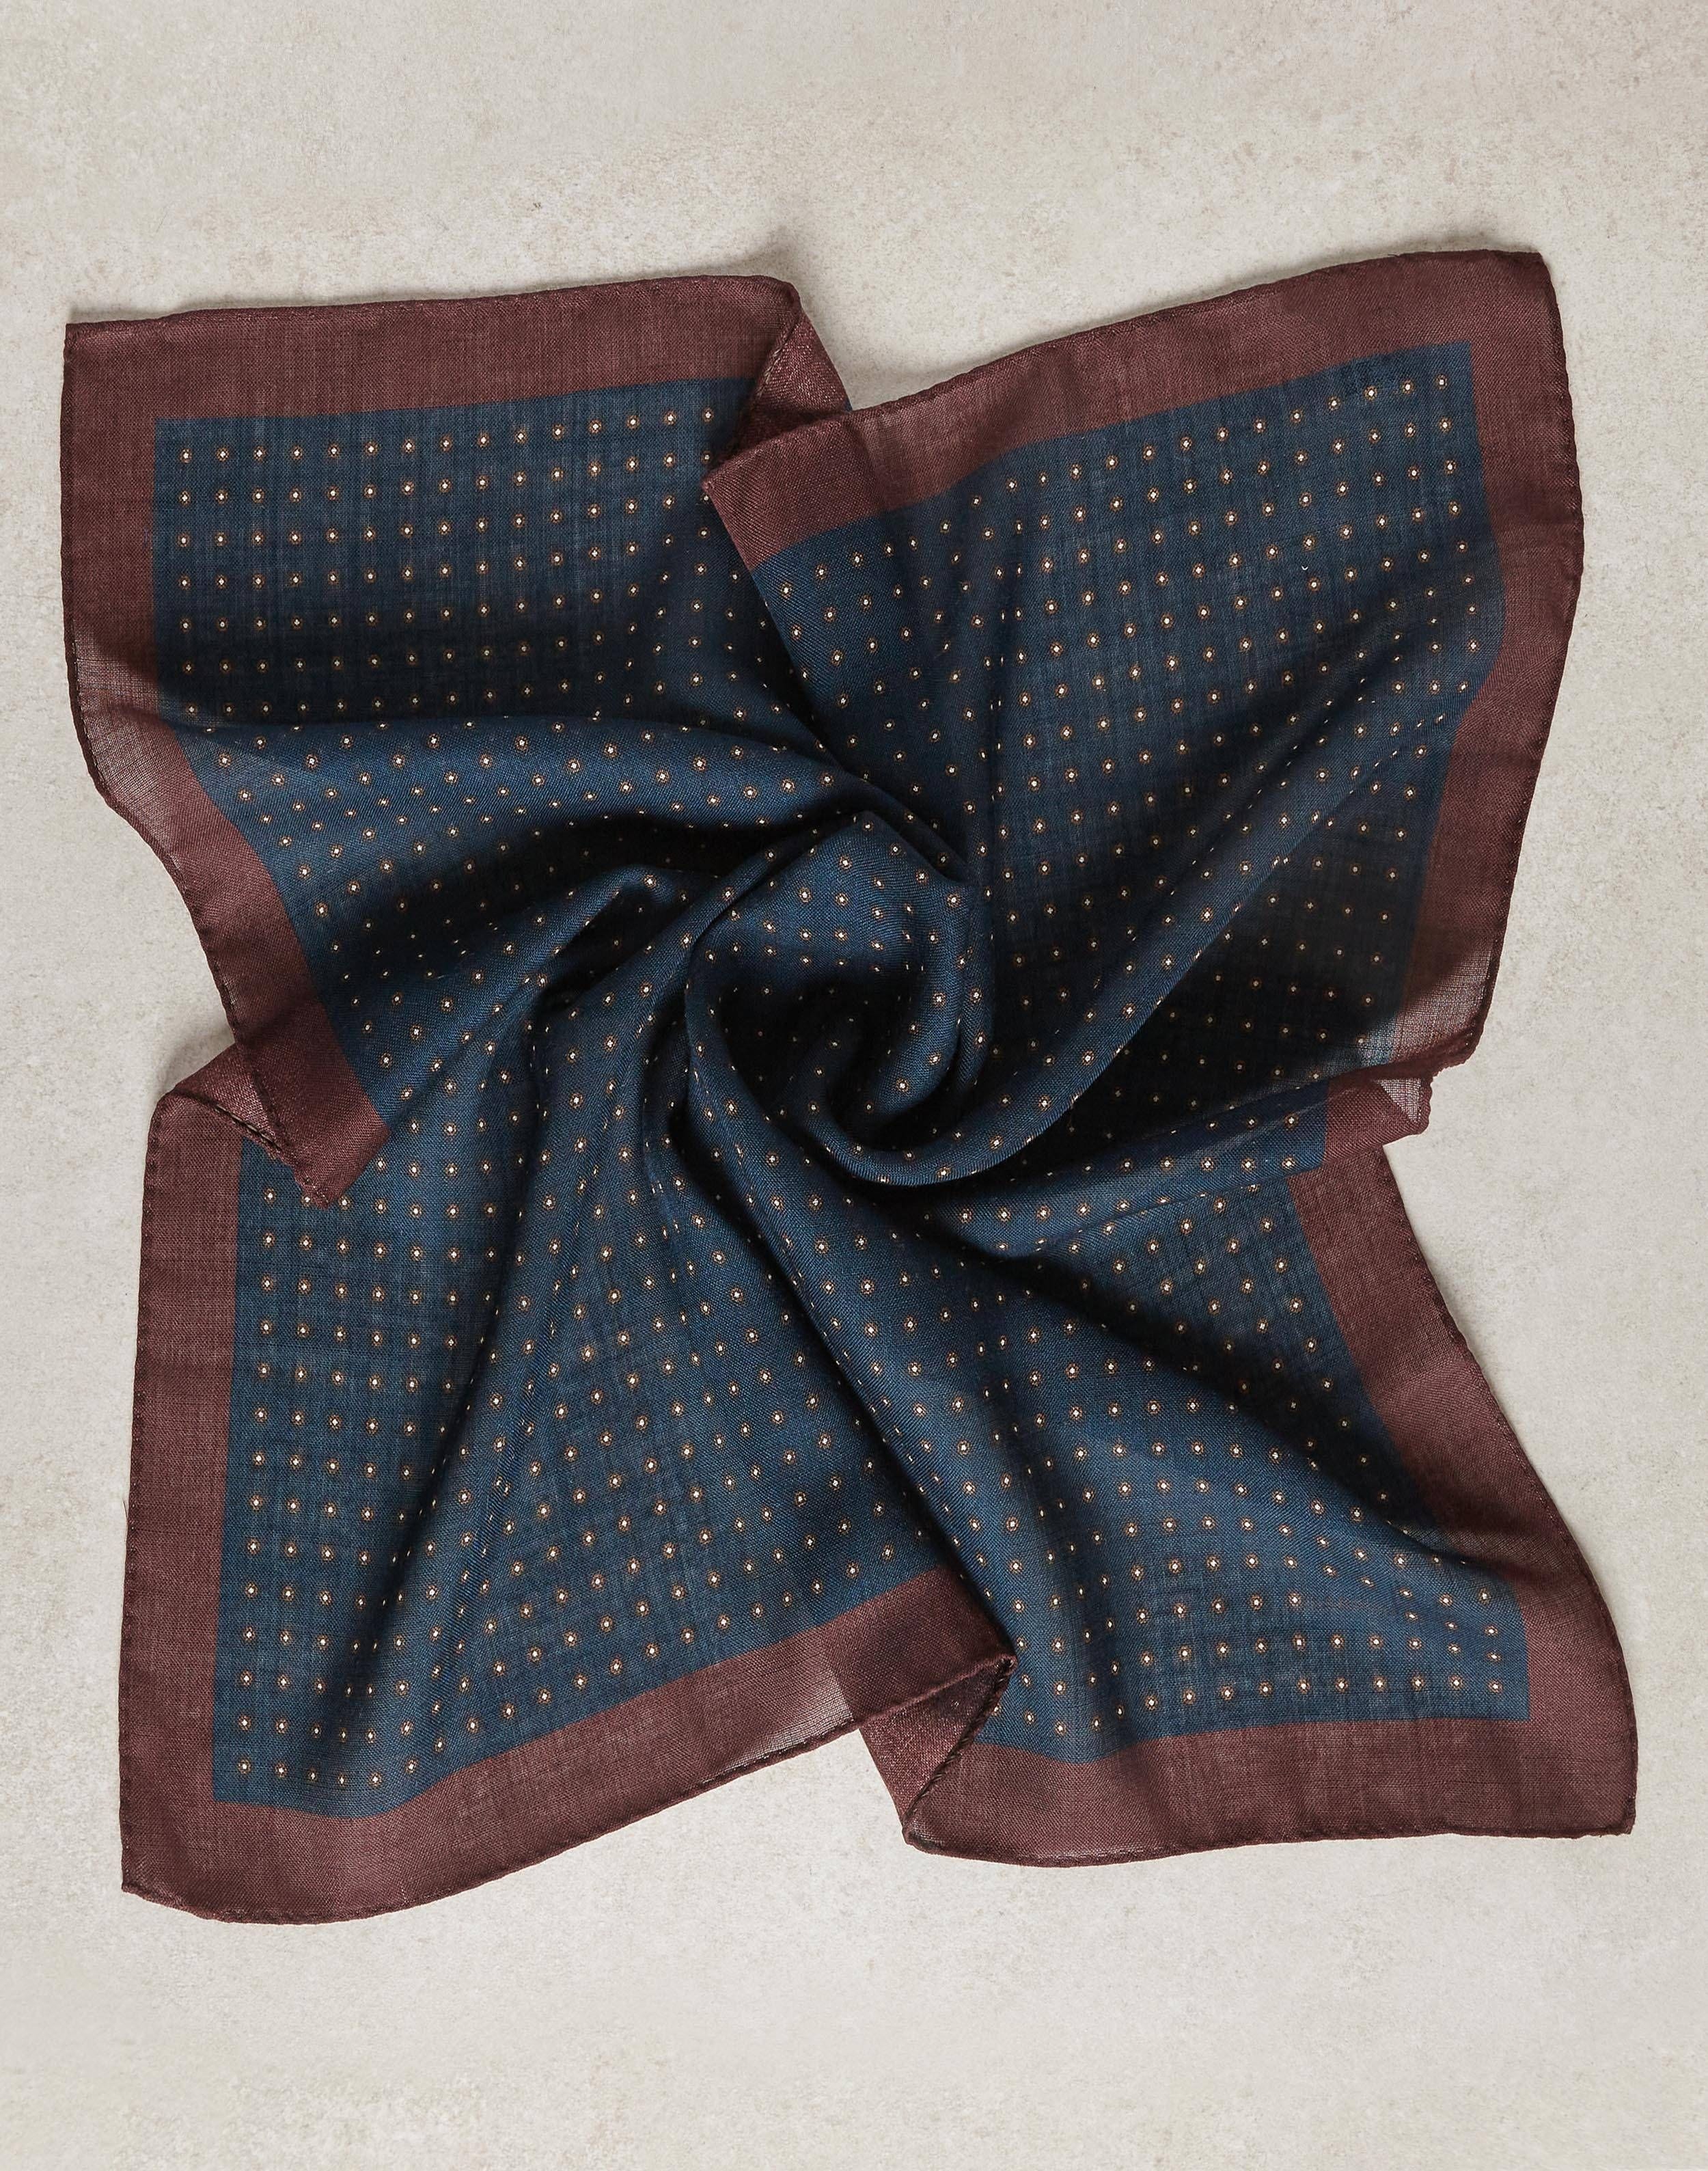 Gauzy-wool scarf in a blue-and-brown pattern